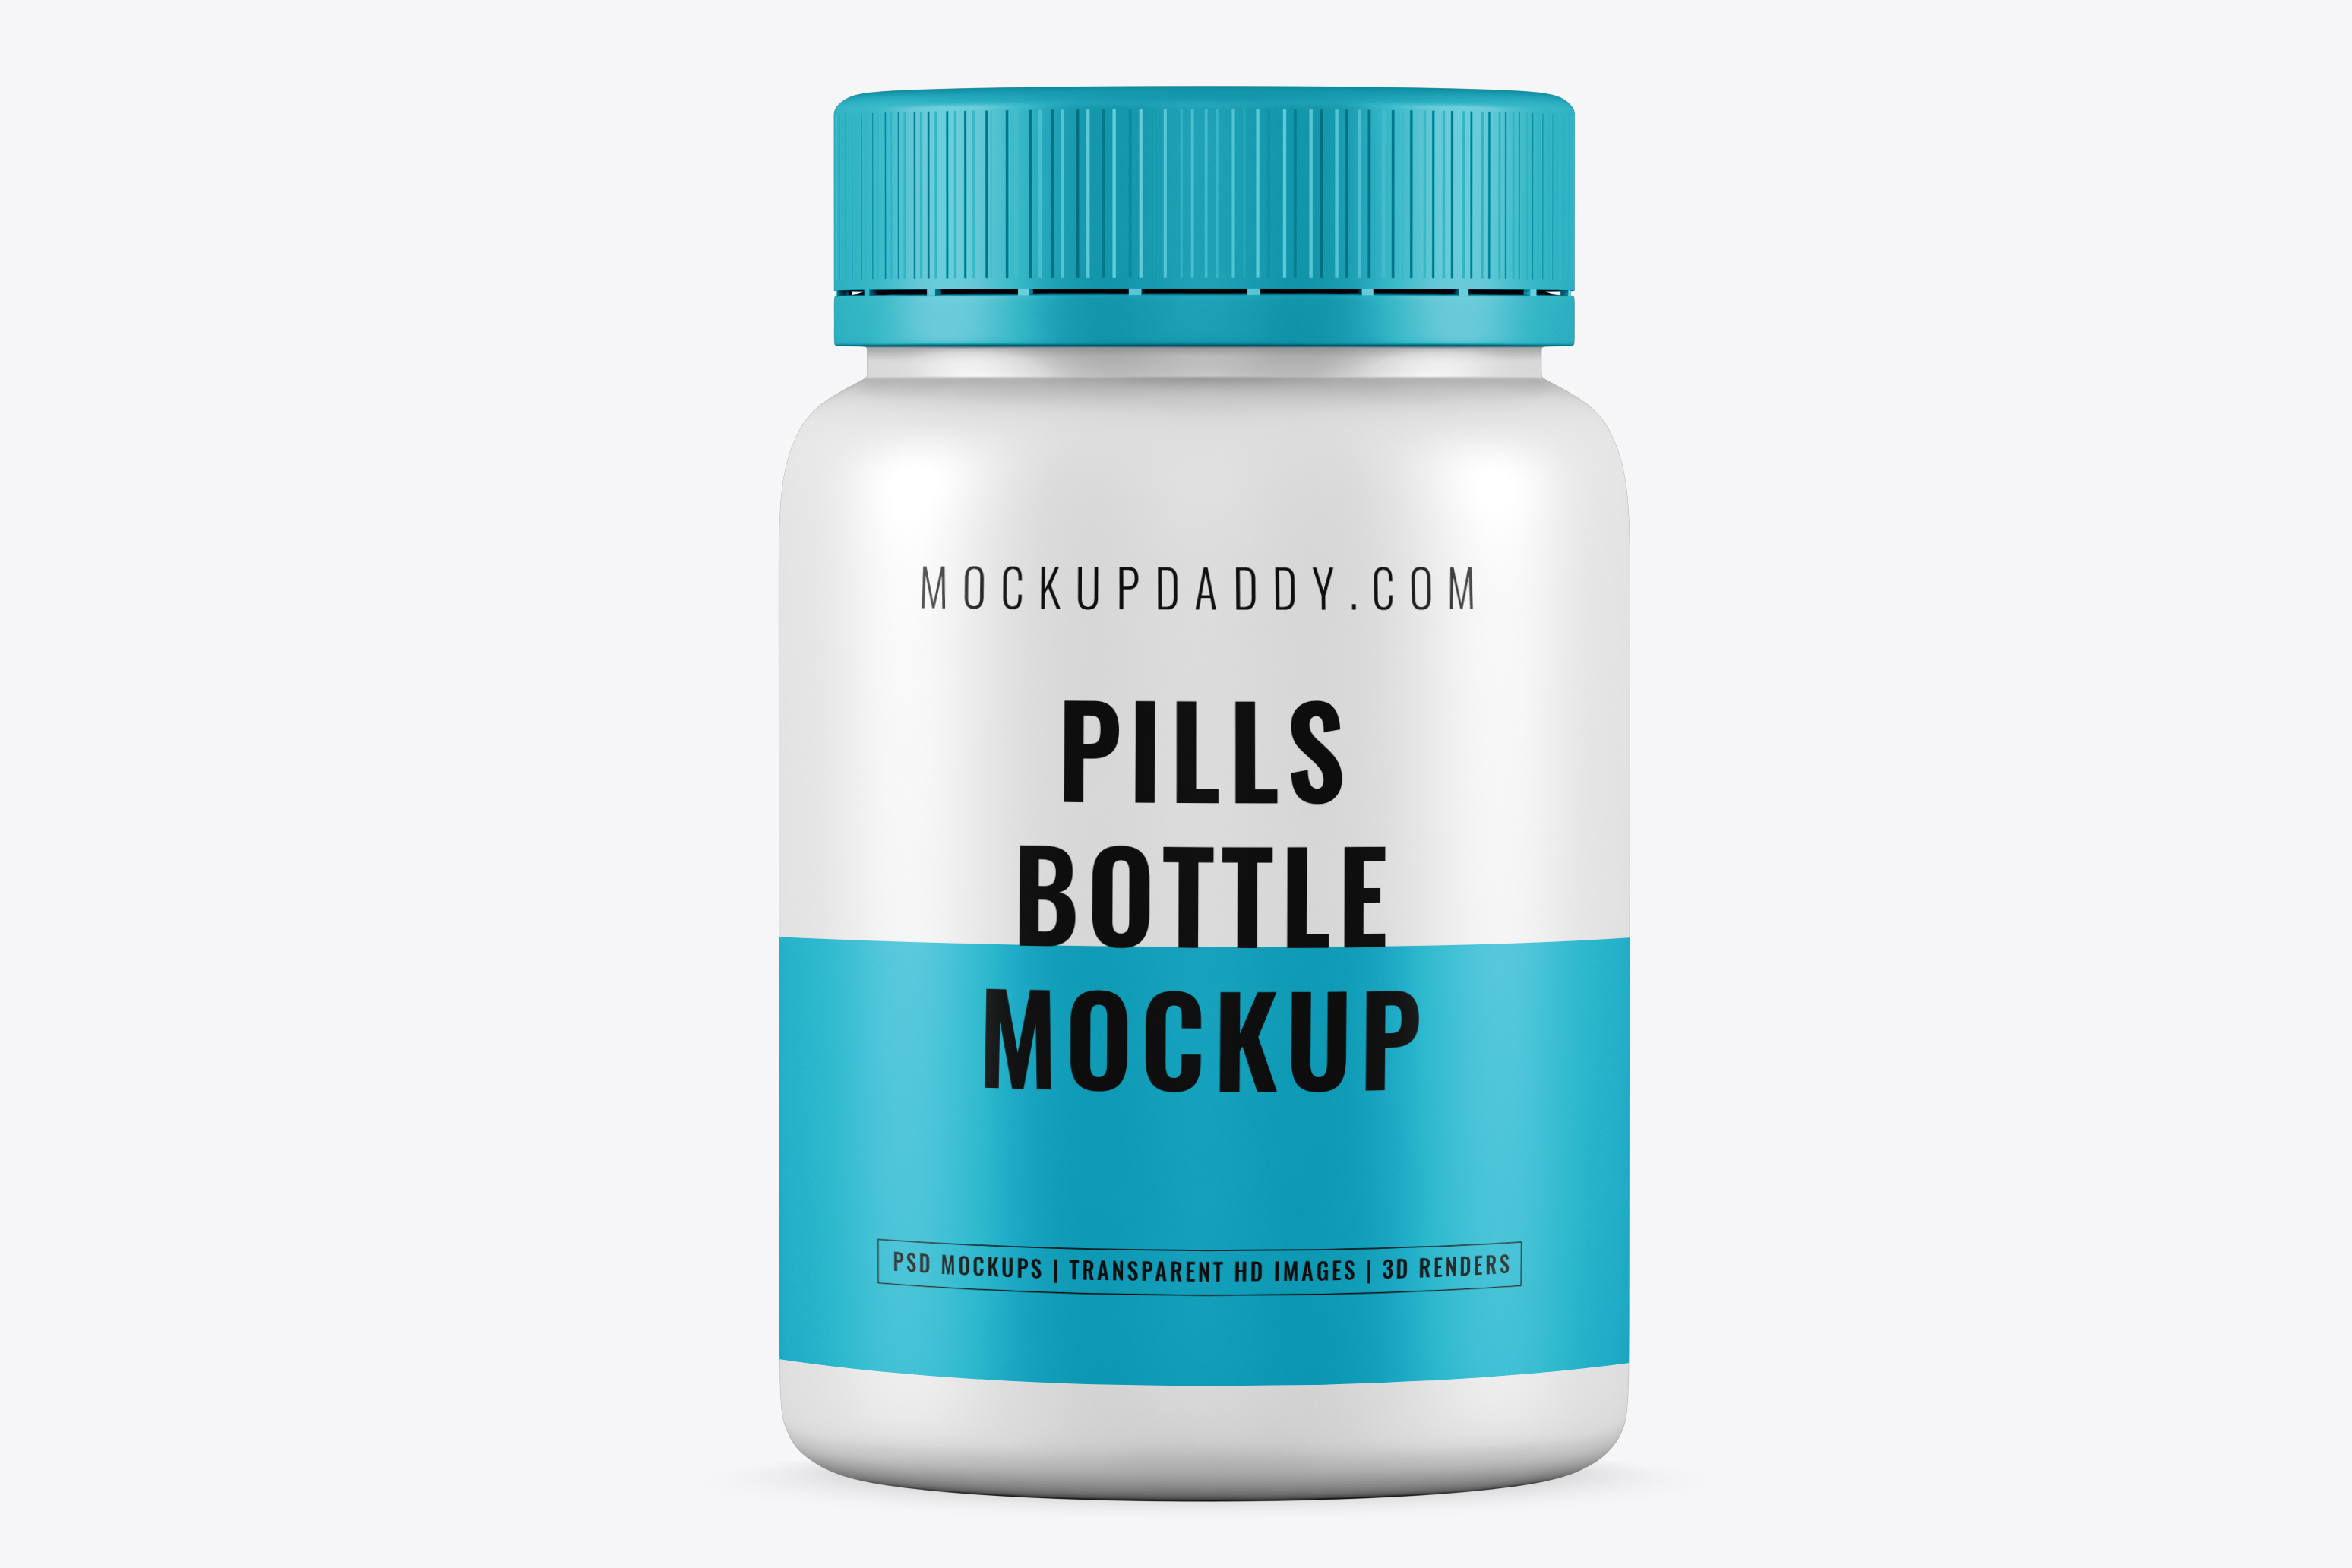 Download Small Pills Bottle Psd Mockup Free Download - Mockup Daddy